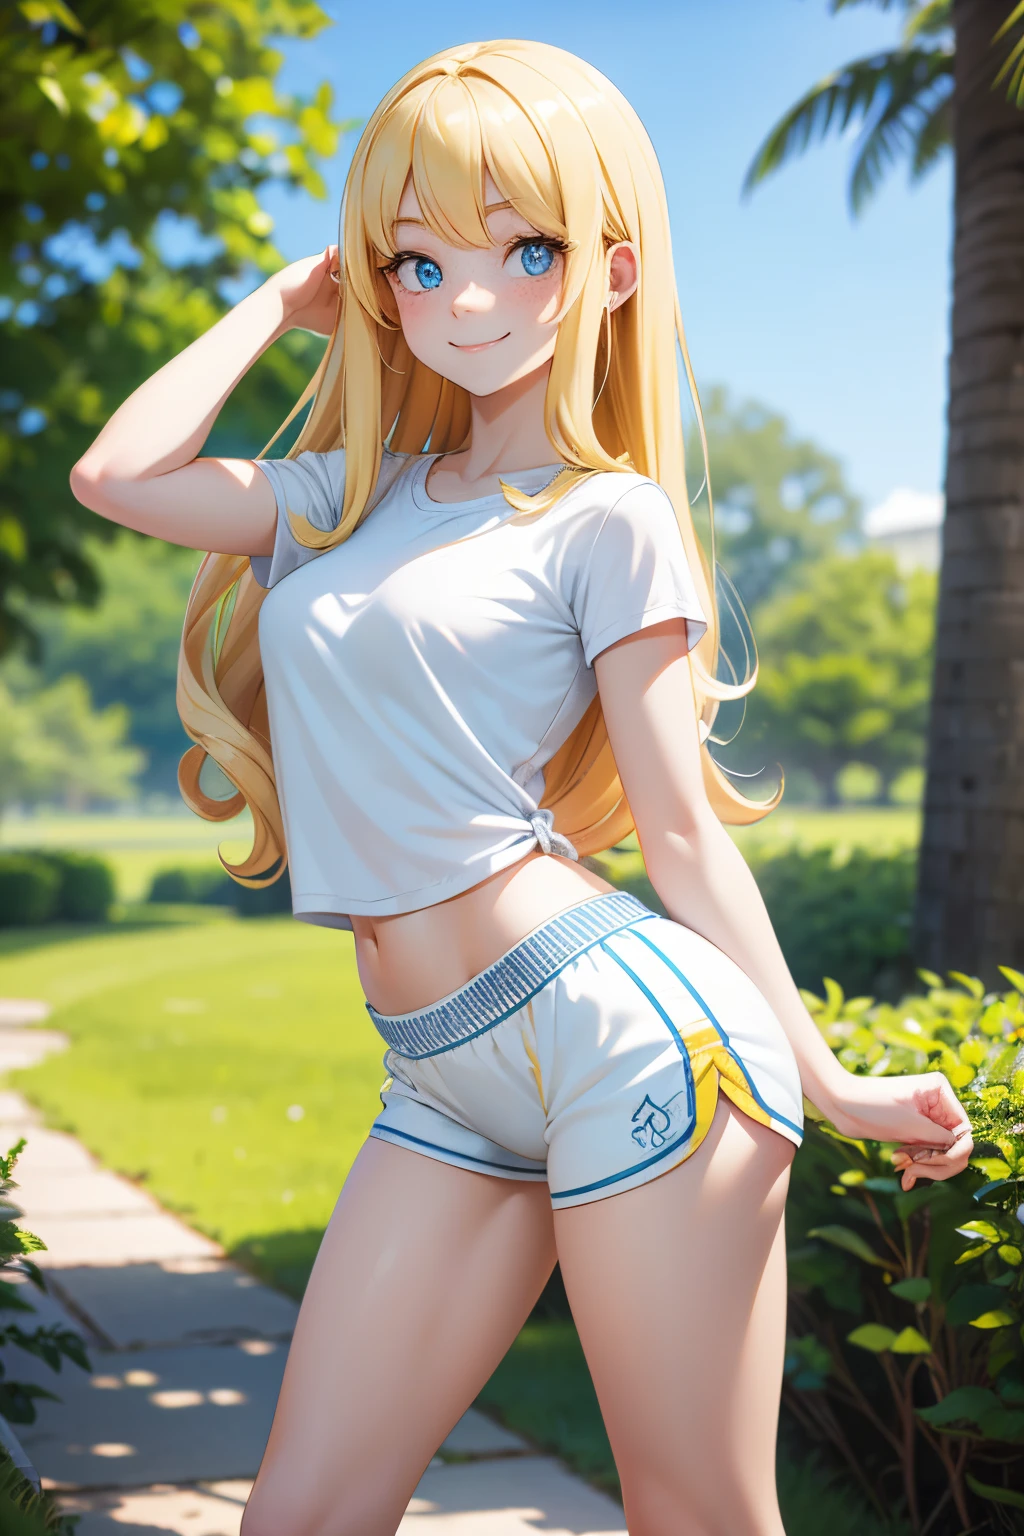 (best-quality:0.8), (best-quality:0.8), very pale skin, long blonde hair, curly hair, light blue eyes, feminine, freckles, , outdoors, white yoga shorts, yellow tshirt, smiling